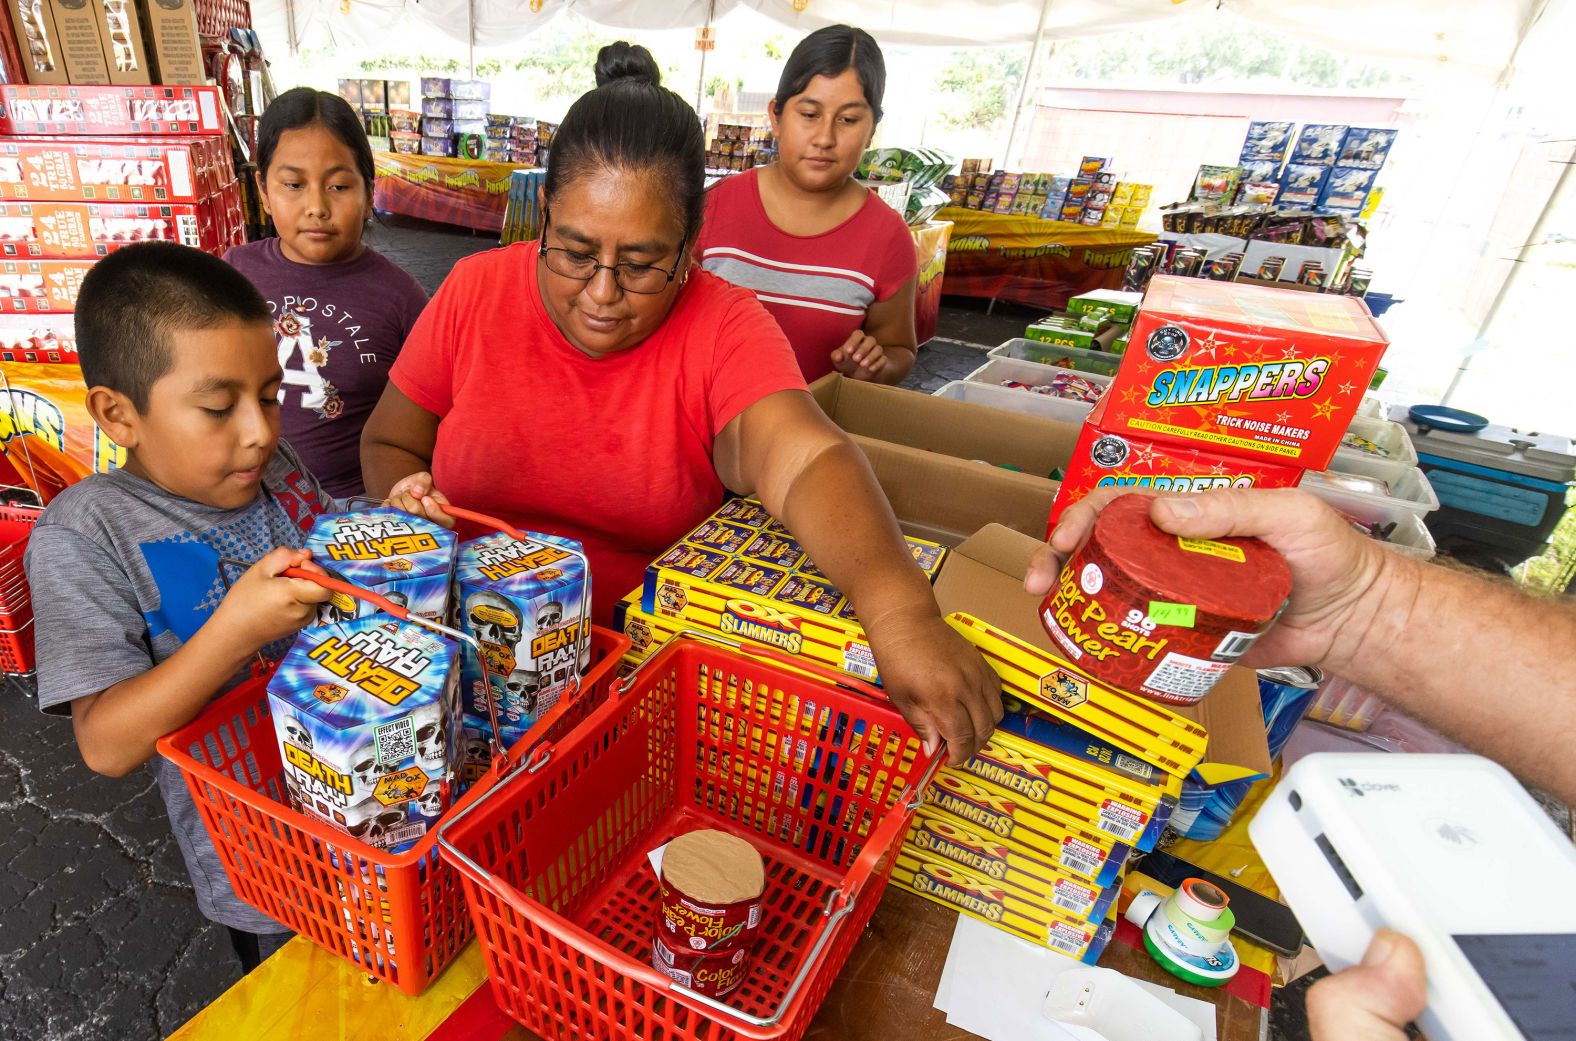 A family purchases fireworks in Ocala, Florida, on Friday.